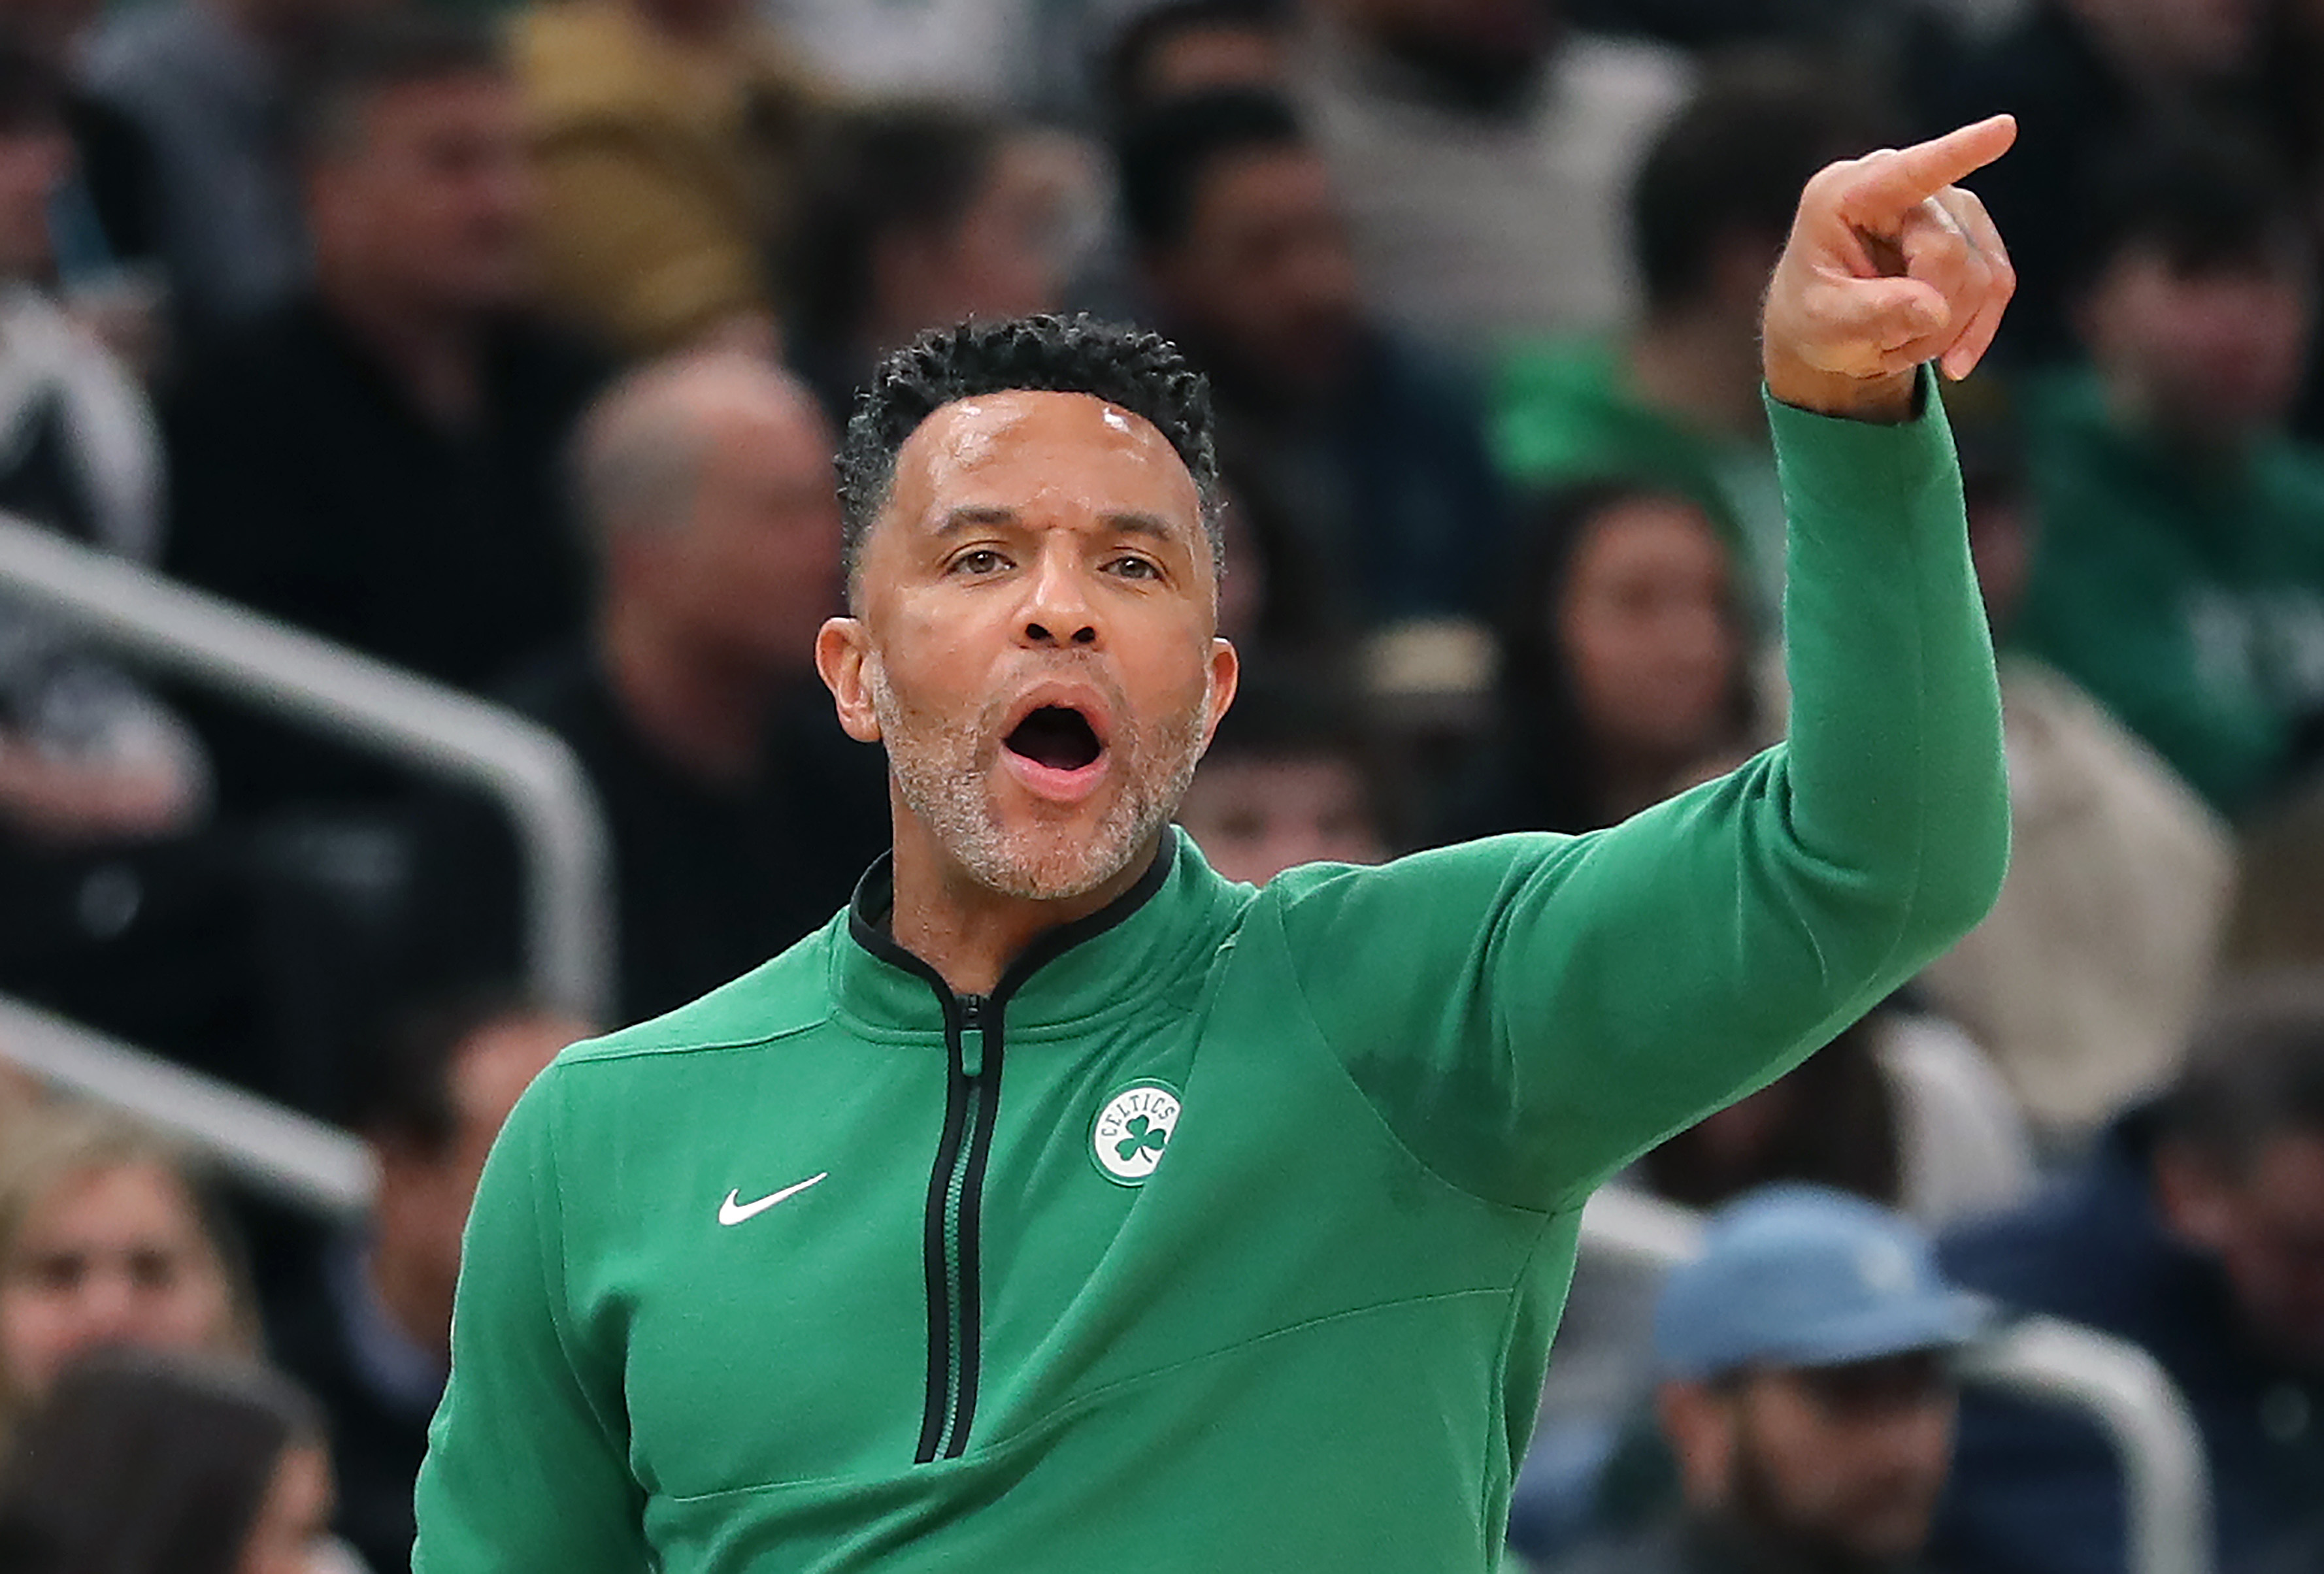 Who is Damon Stoudamire: Former NBA player who made his head coach debut  for Boston Celtics after Joe Mazzulla's eye ailment